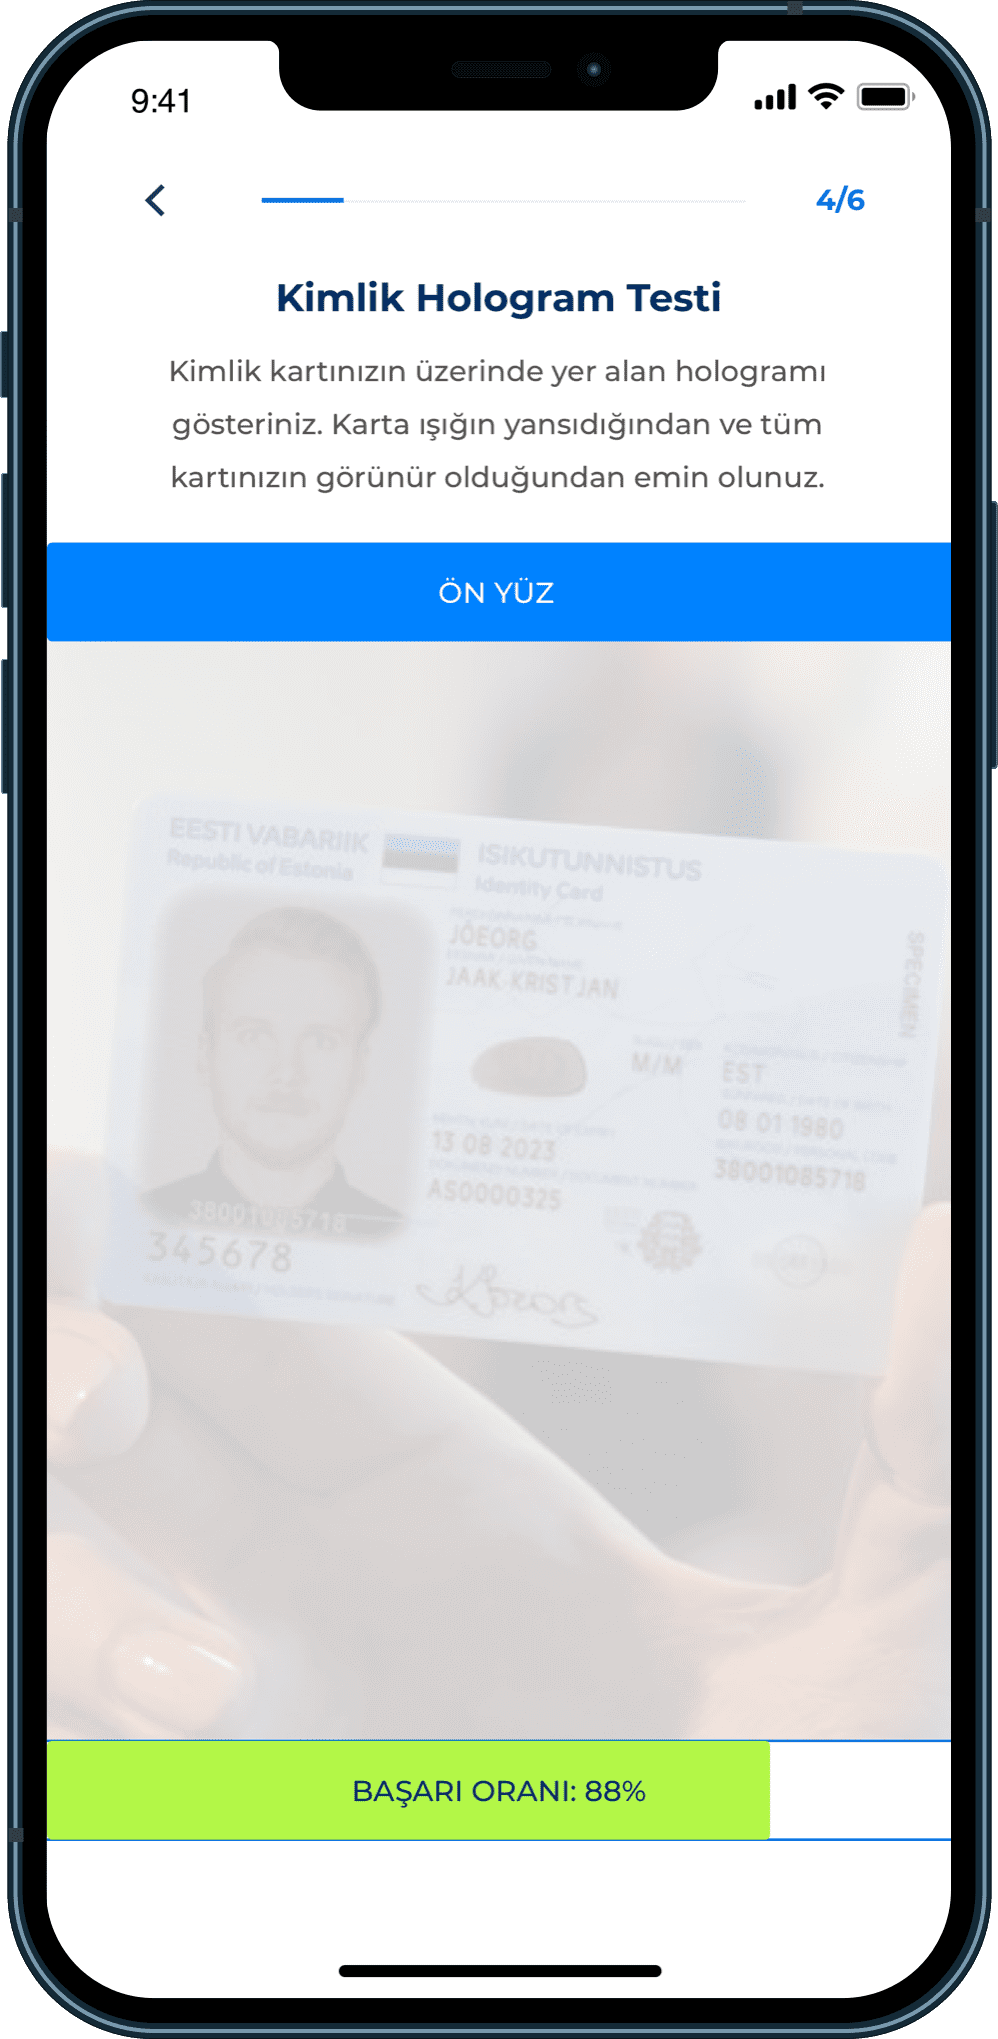 Detection of security elements on the identity card